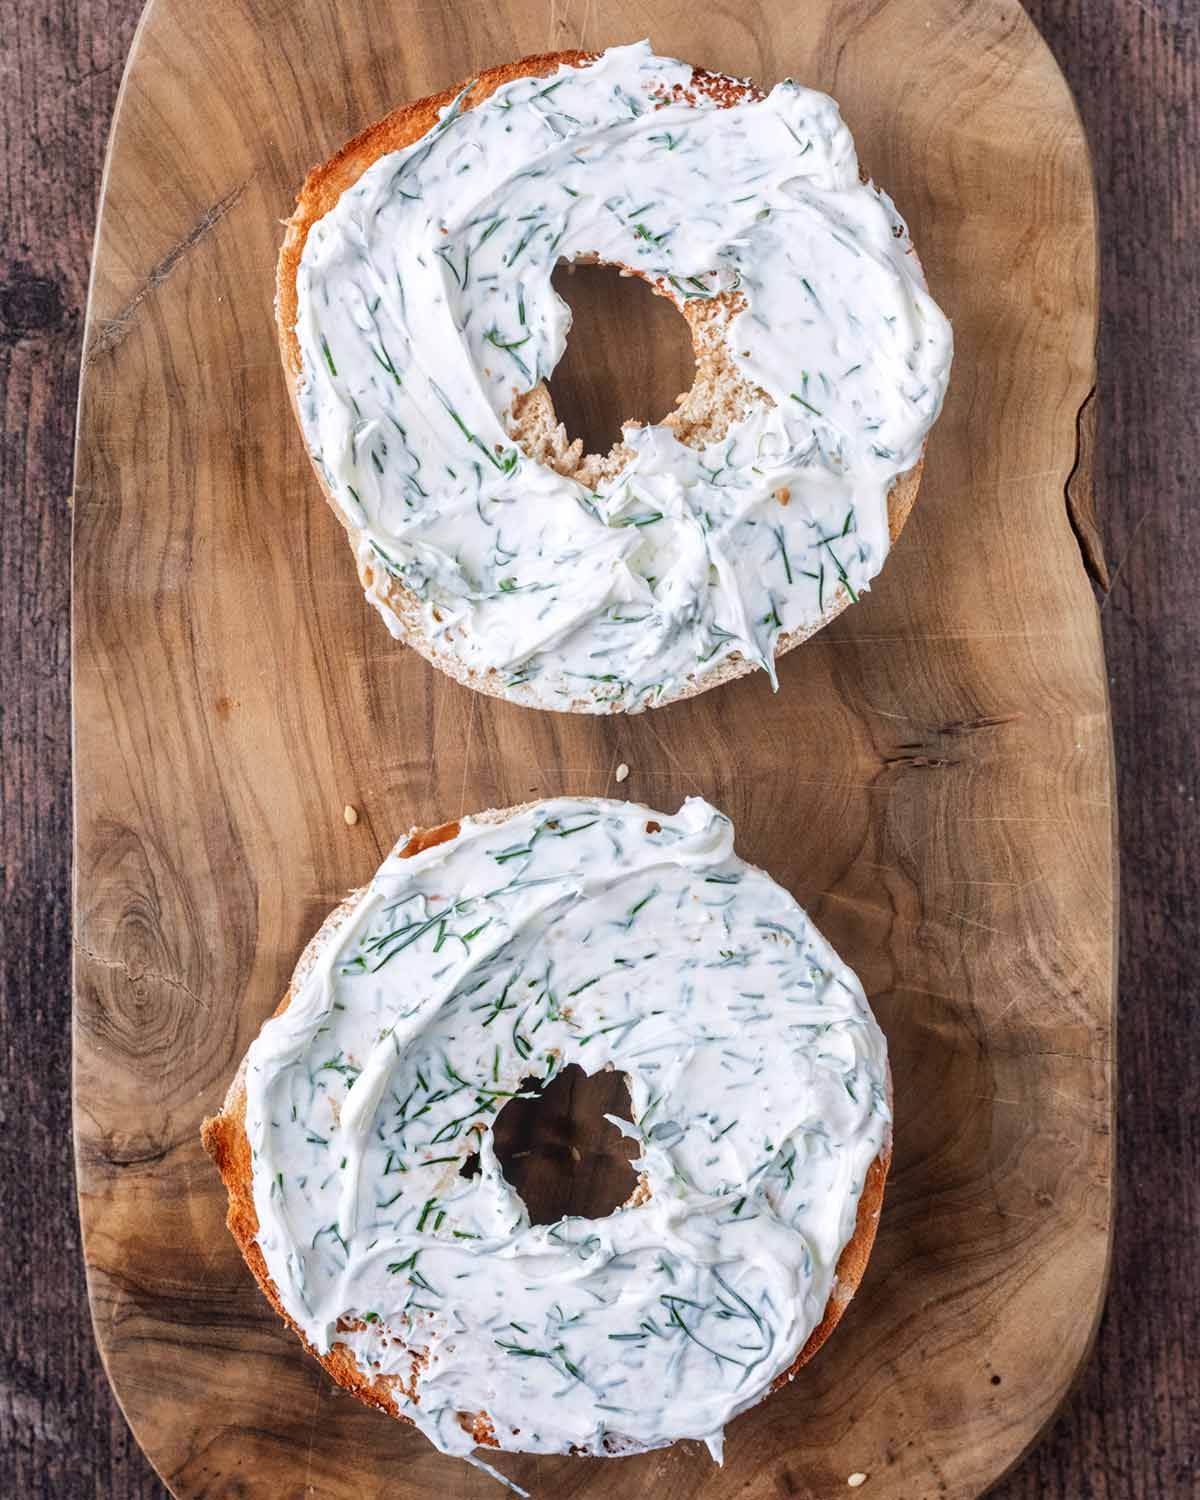 Cream cheese and dill mixture spread over the bagel halved.